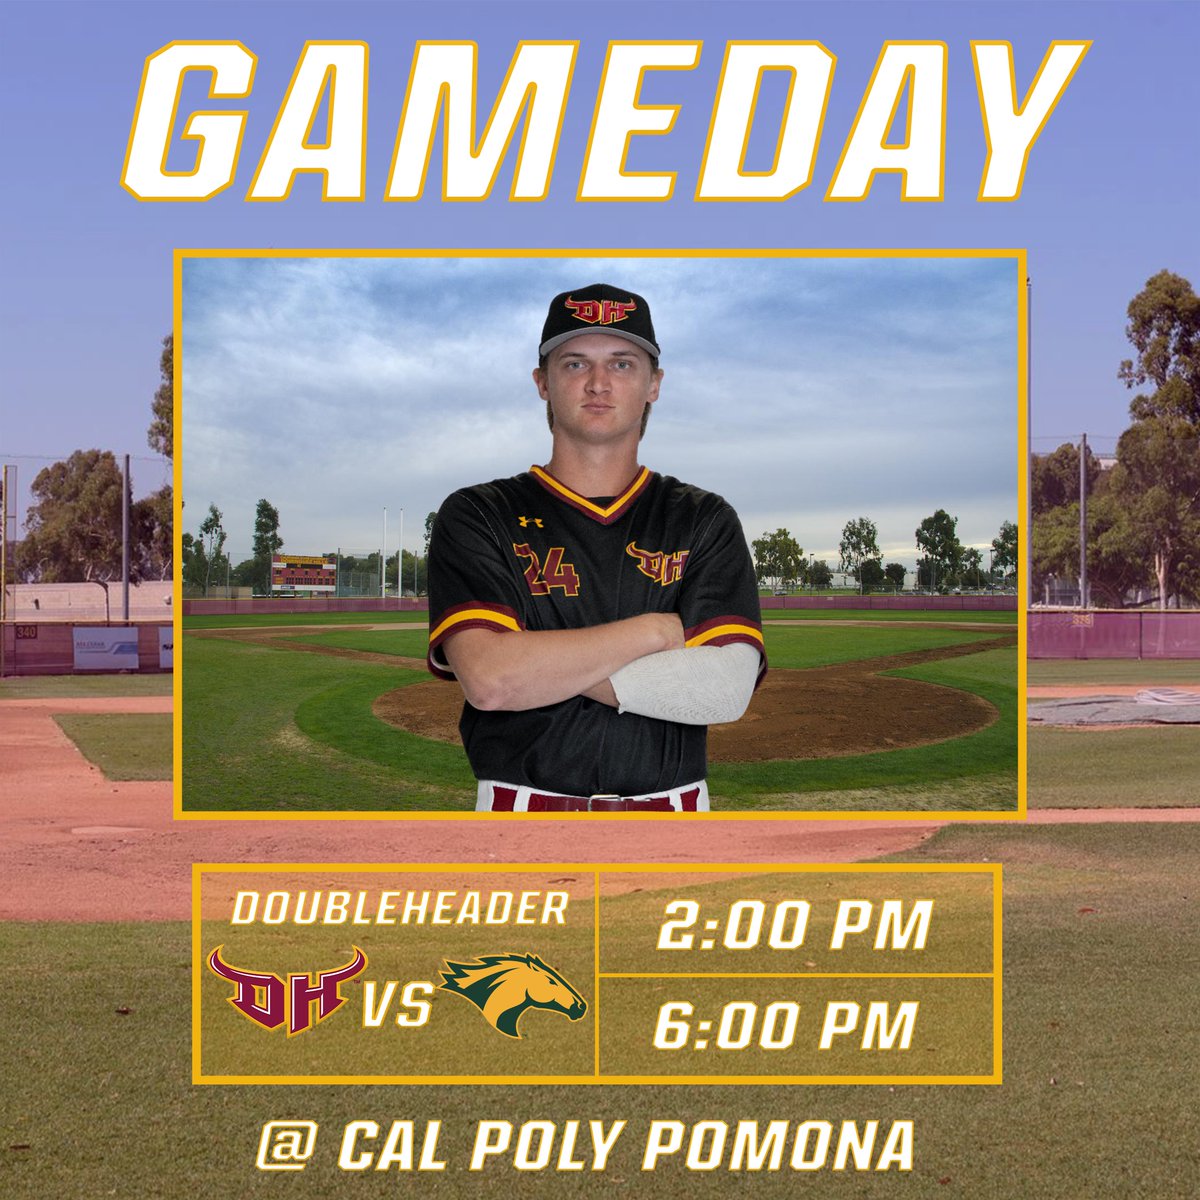 Gameday! @CSUDHbaseball continues their series against Cal Poly Pomona in Doubleheader today. ⏰: 2 pm & 6 pm 📍: Pomona, CA 📺: ccaanetwork.com 📊: bit.ly/3wcf06X